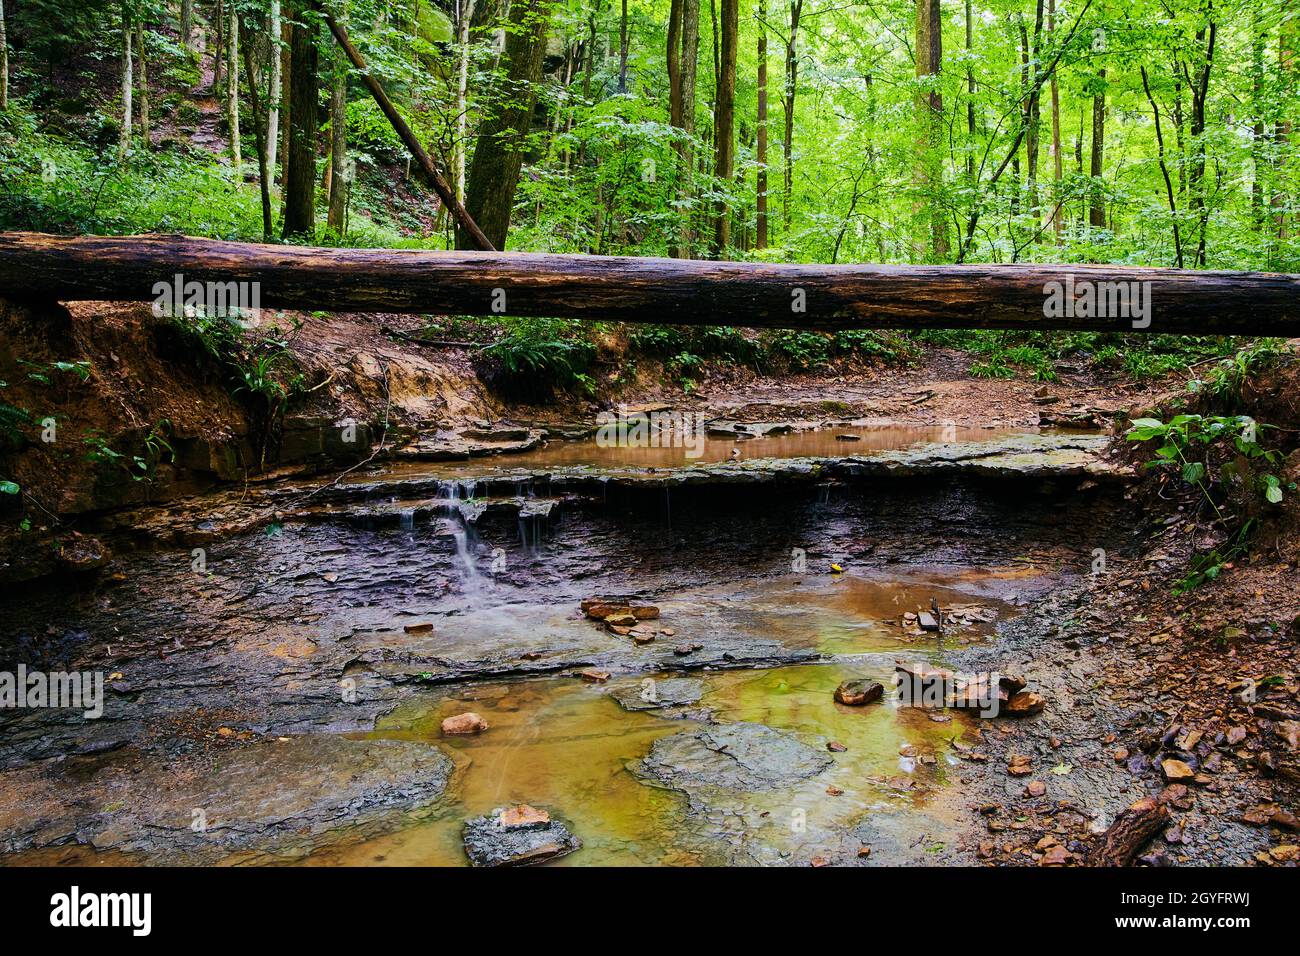 Large log over brown cliffy river Stock Photo